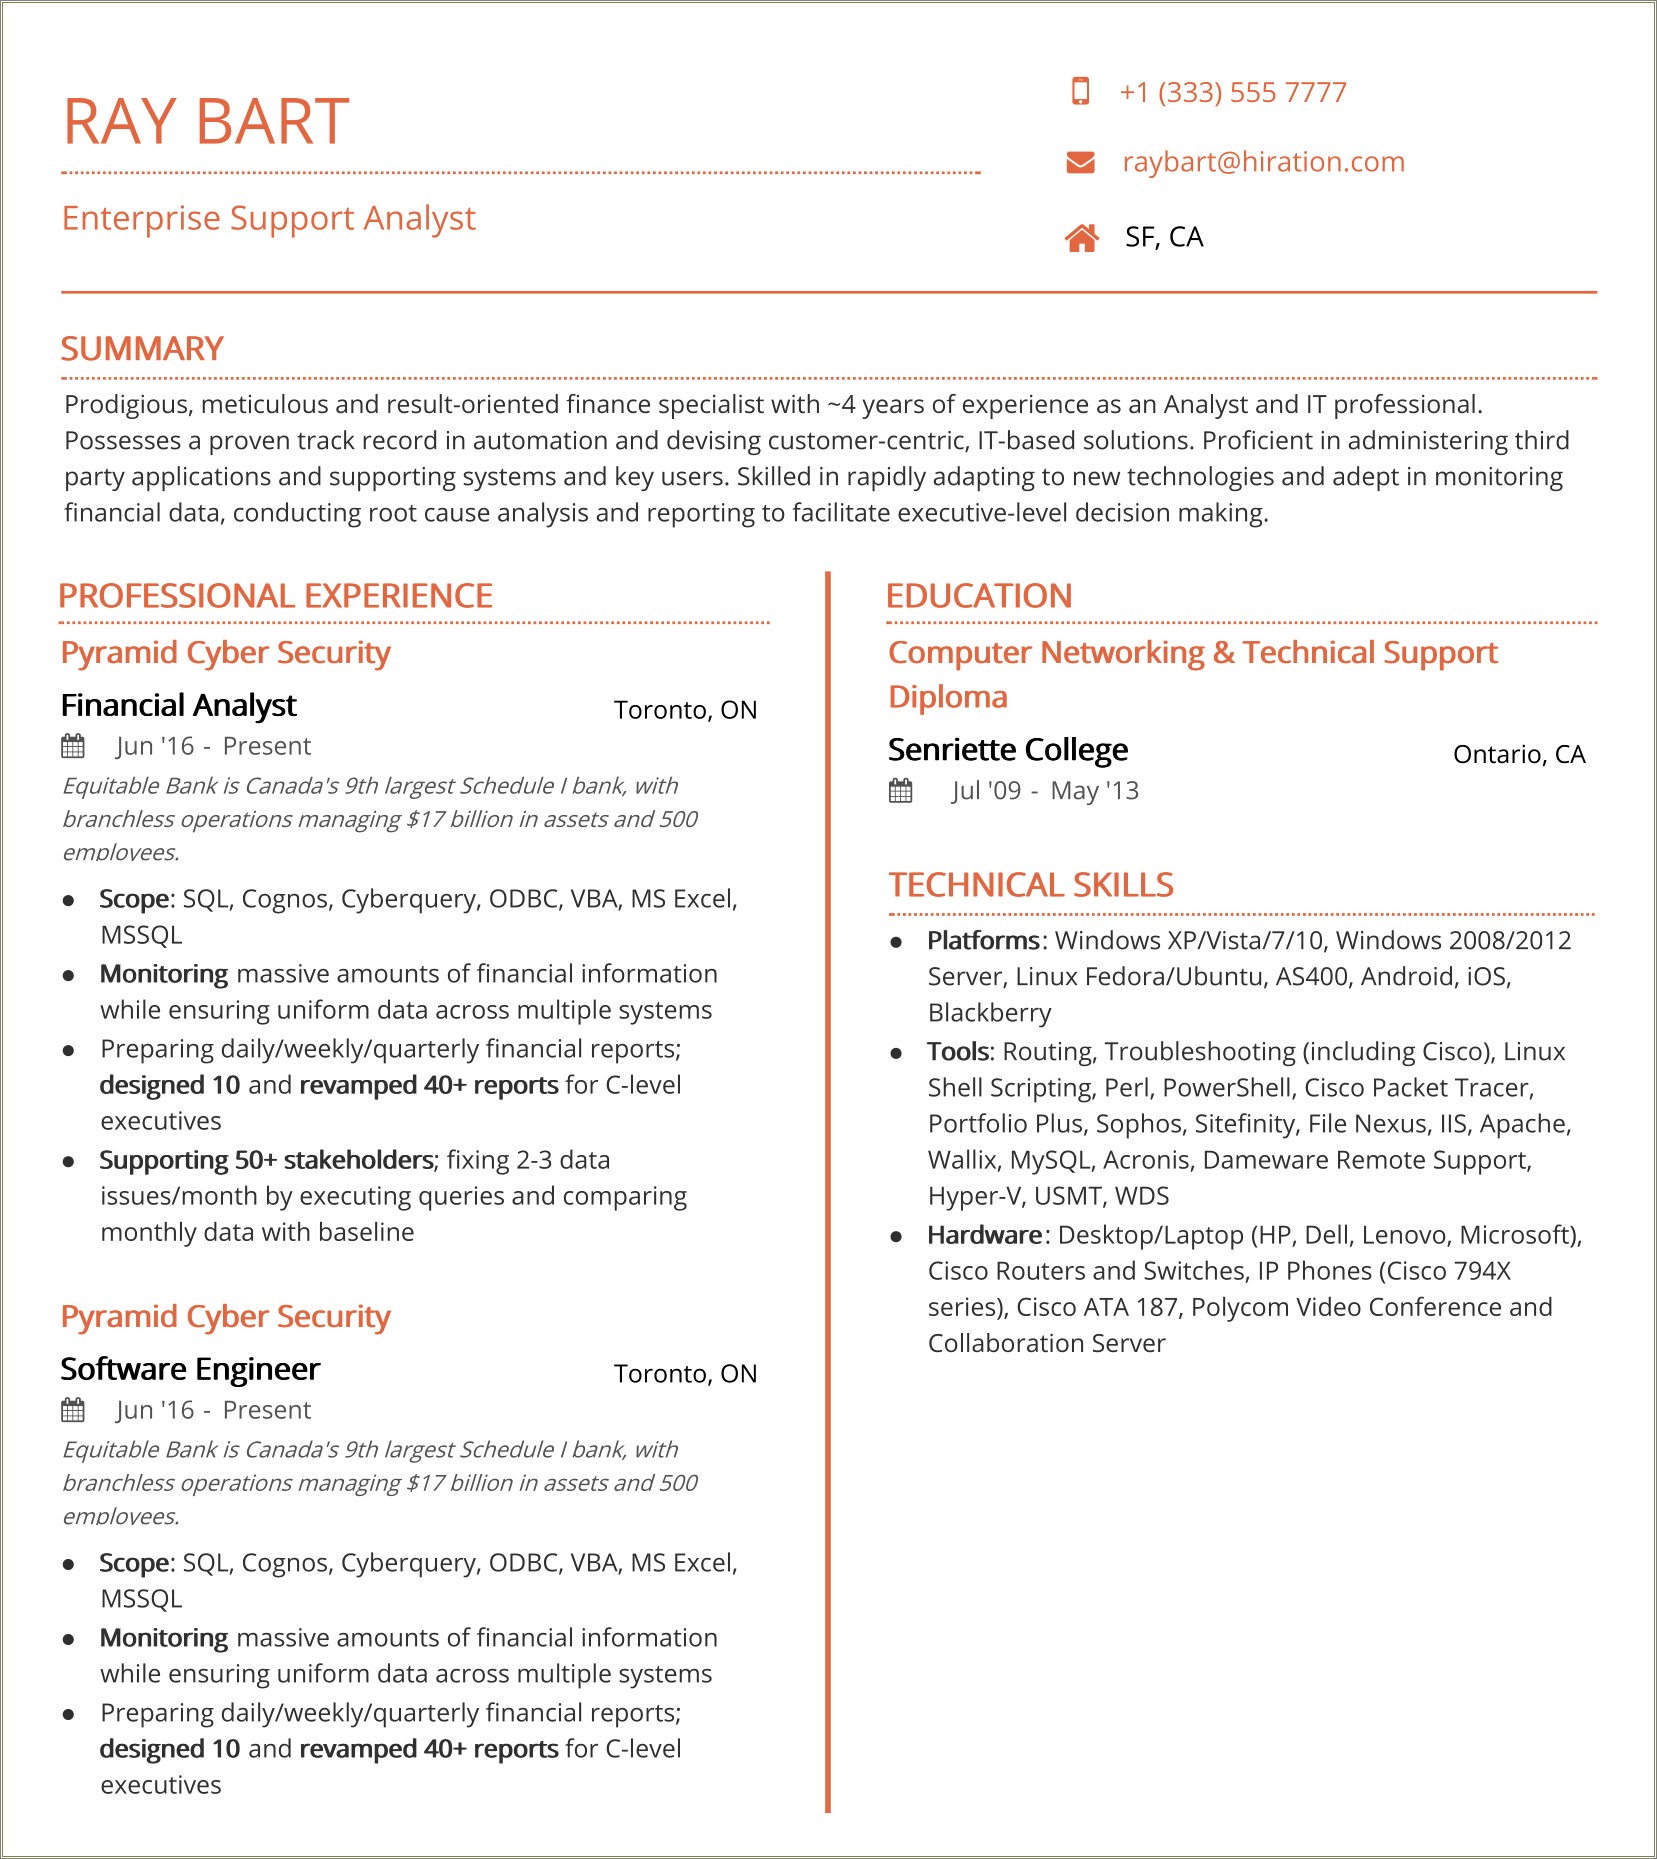 As400 I Series Monitoring Description For Your Resume